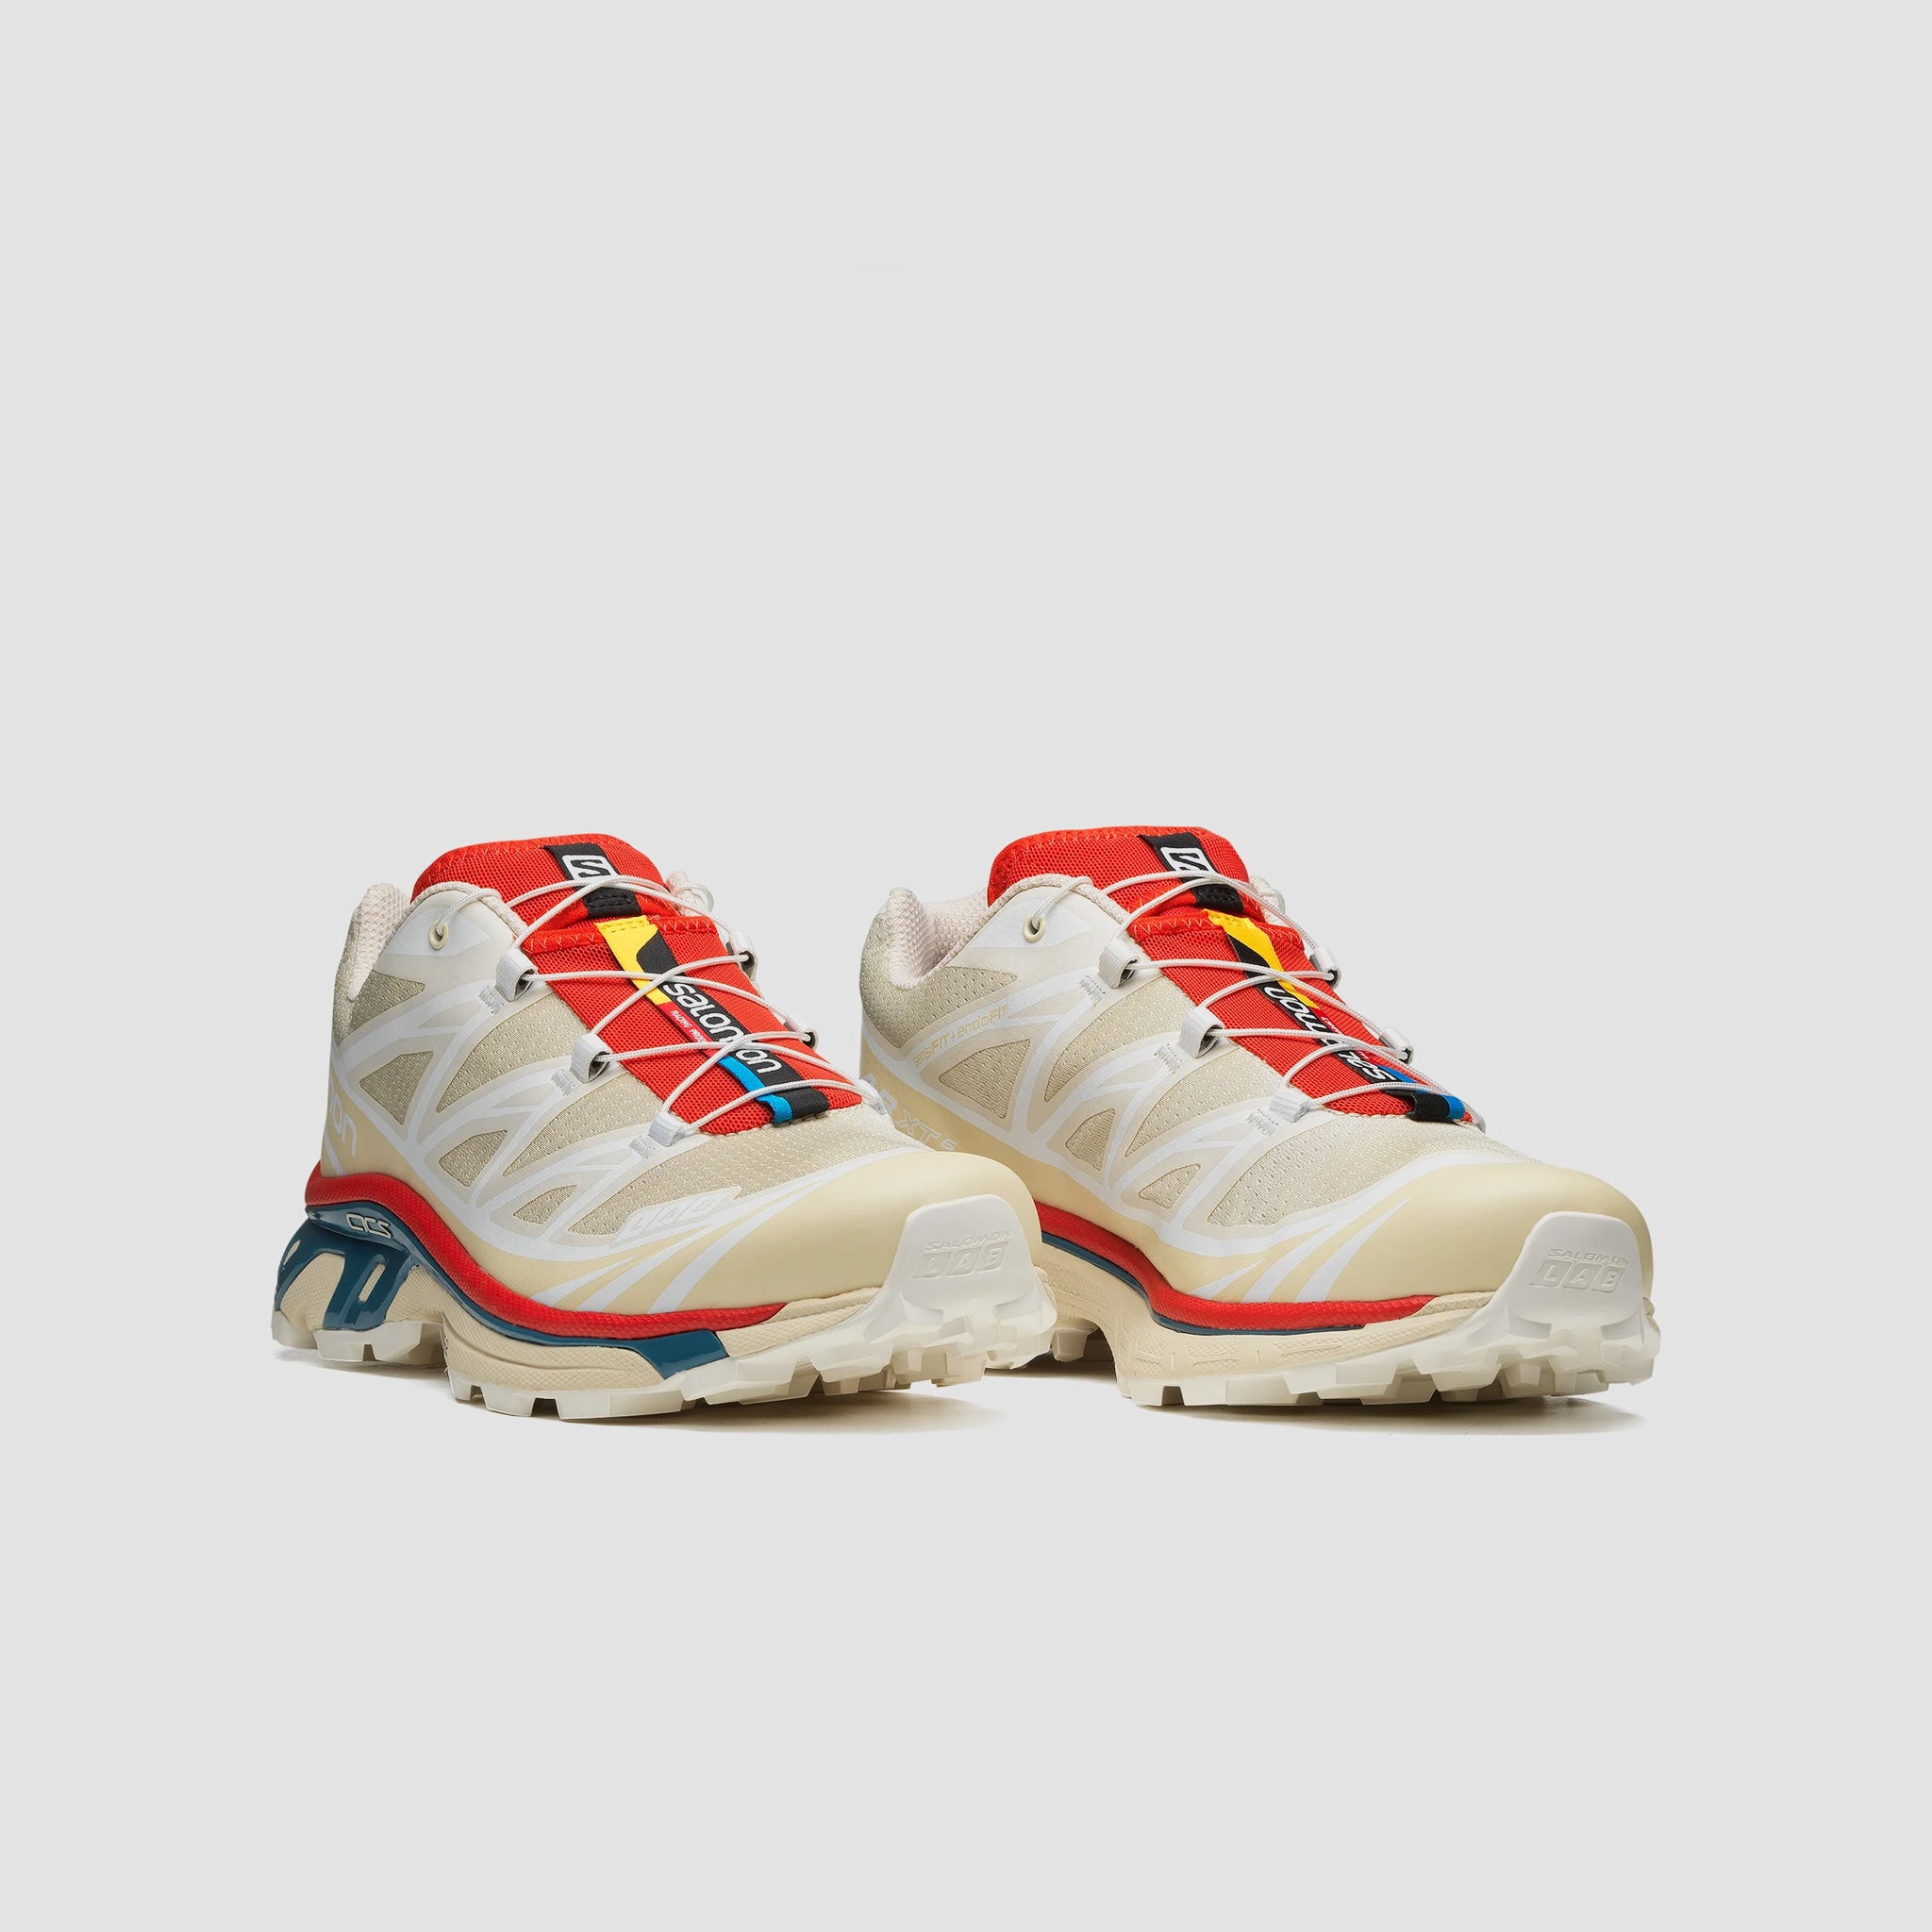 Off white XT-6 Salomon Sneakers with vibrant red and teal blue sole details, angled view of pair of shoes.